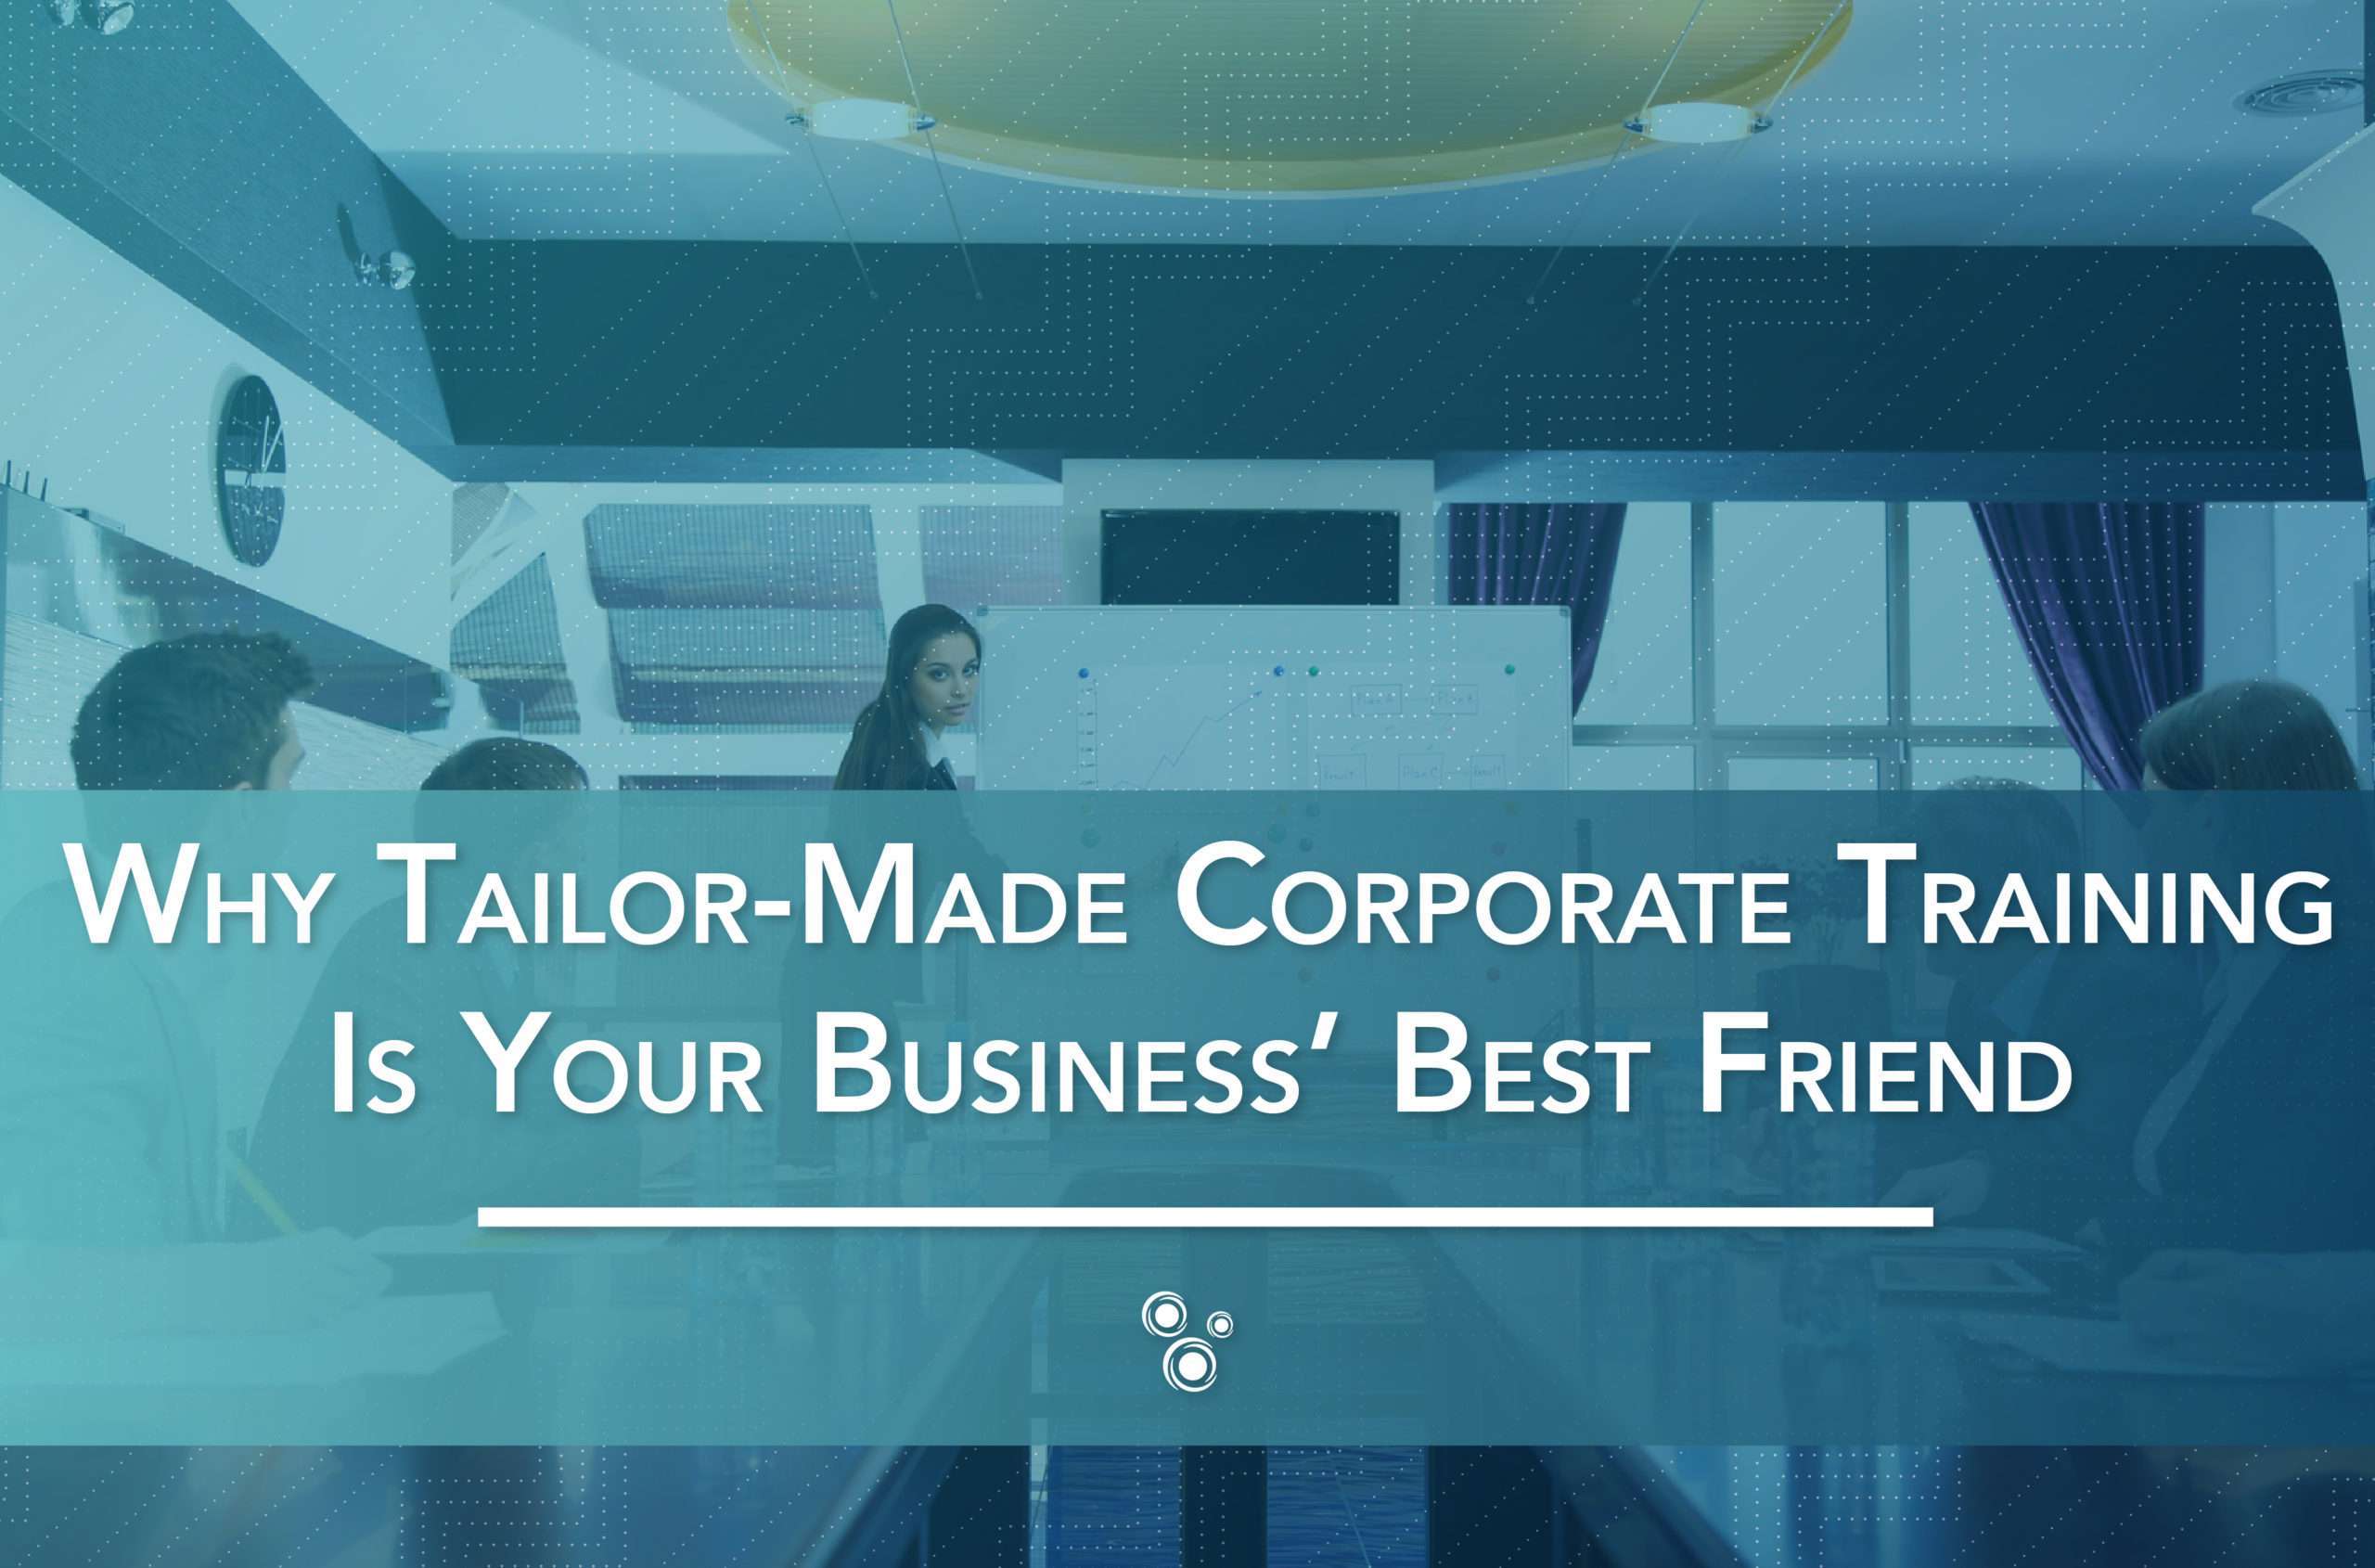 Why Tailor-Made Corporate Training Is Your Business’ Best Friend